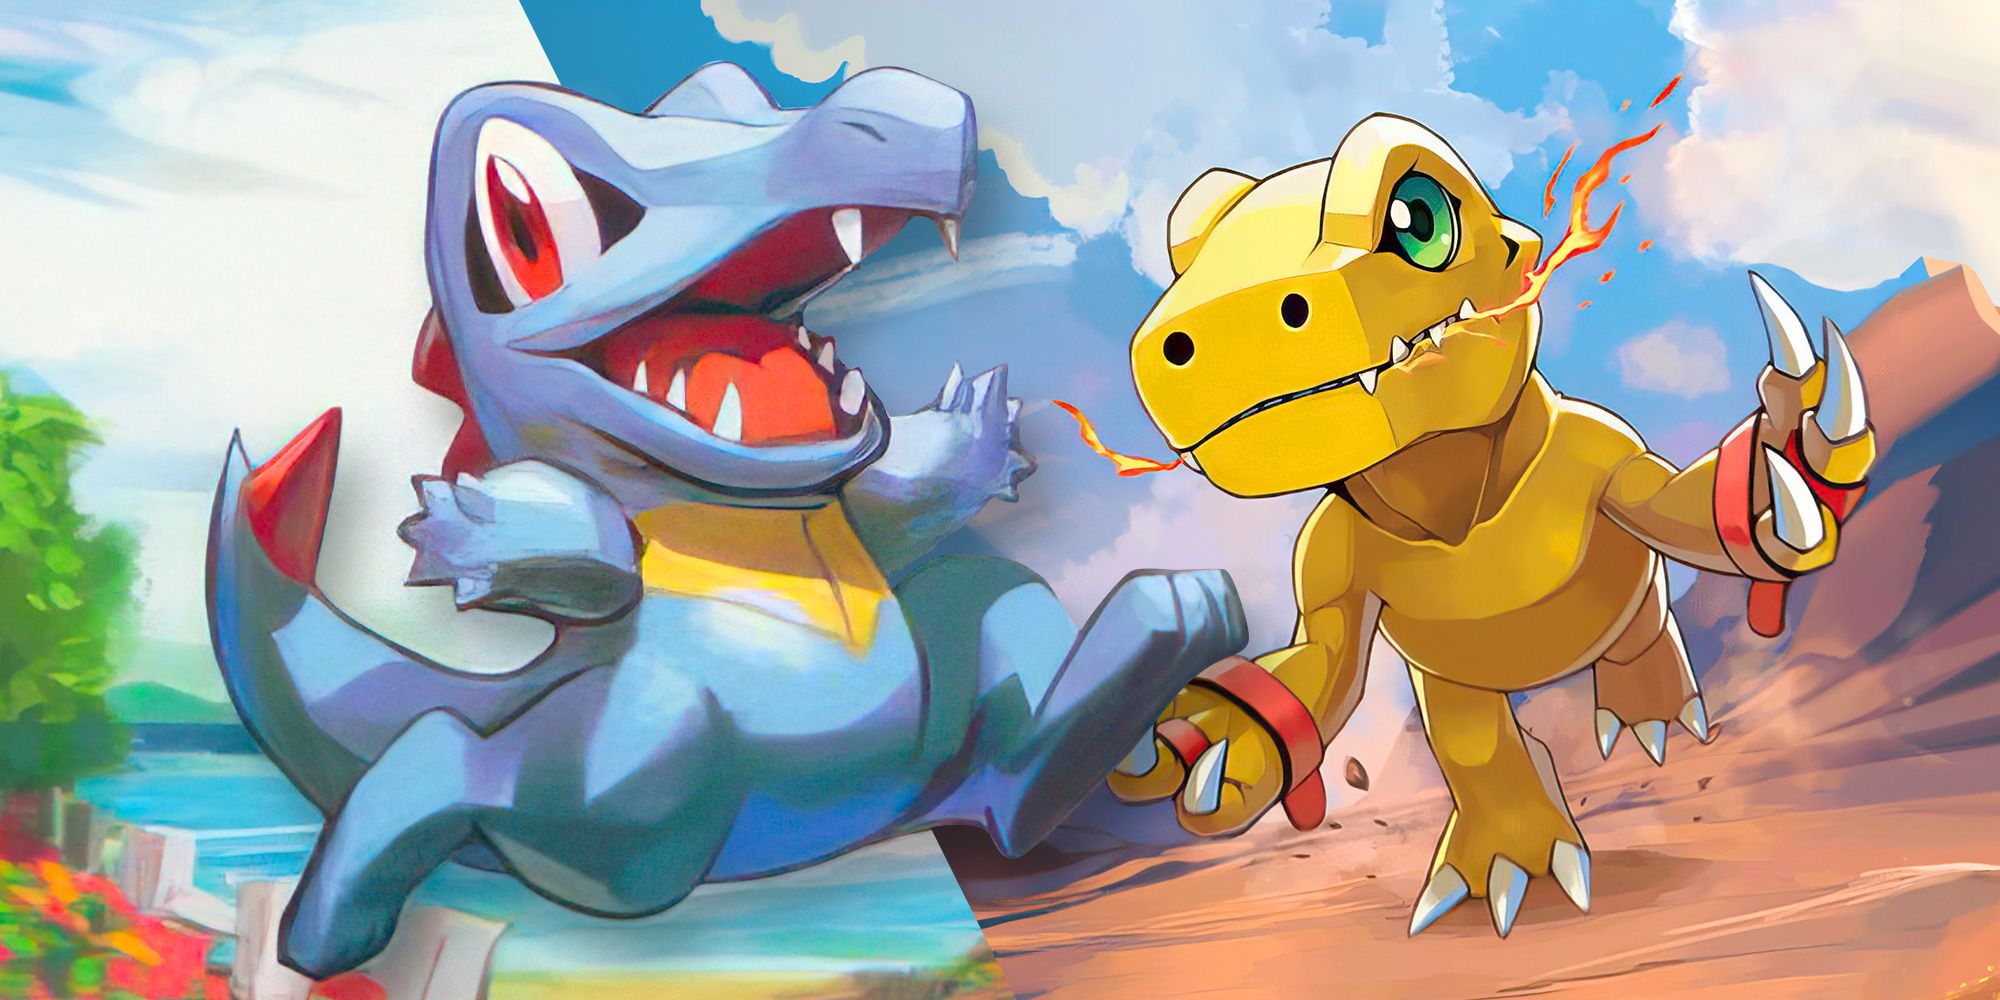 Totodile jumping out from the Pokemon universe into the Digital World